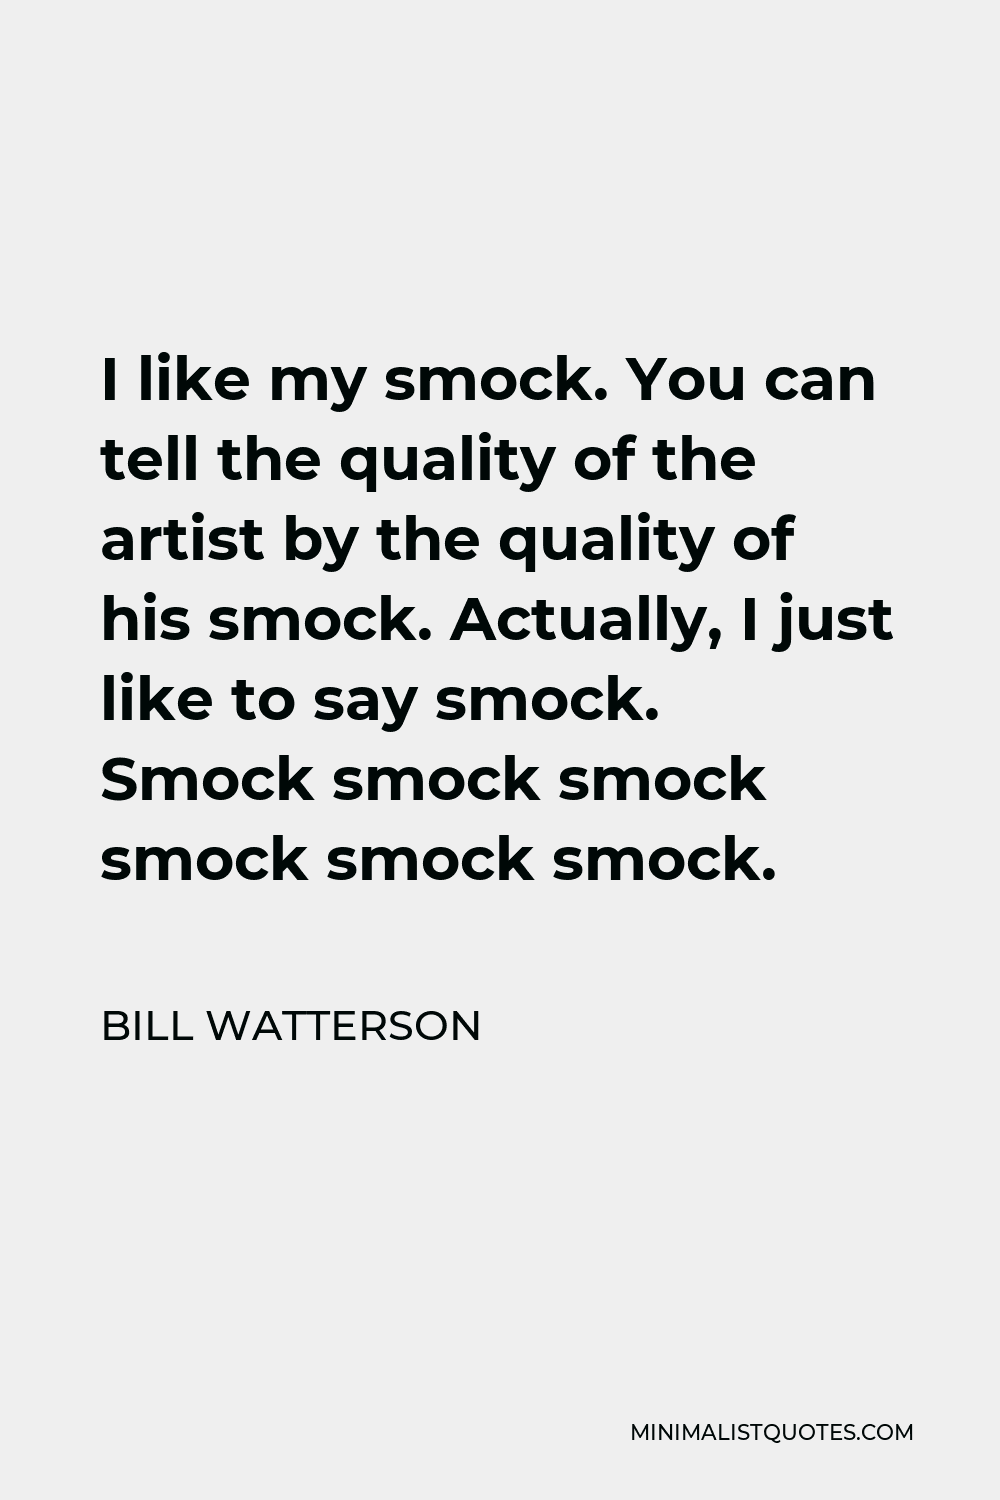 Bill Watterson Quote - I like my smock. You can tell the quality of the artist by the quality of his smock. Actually, I just like to say smock. Smock smock smock smock smock smock.